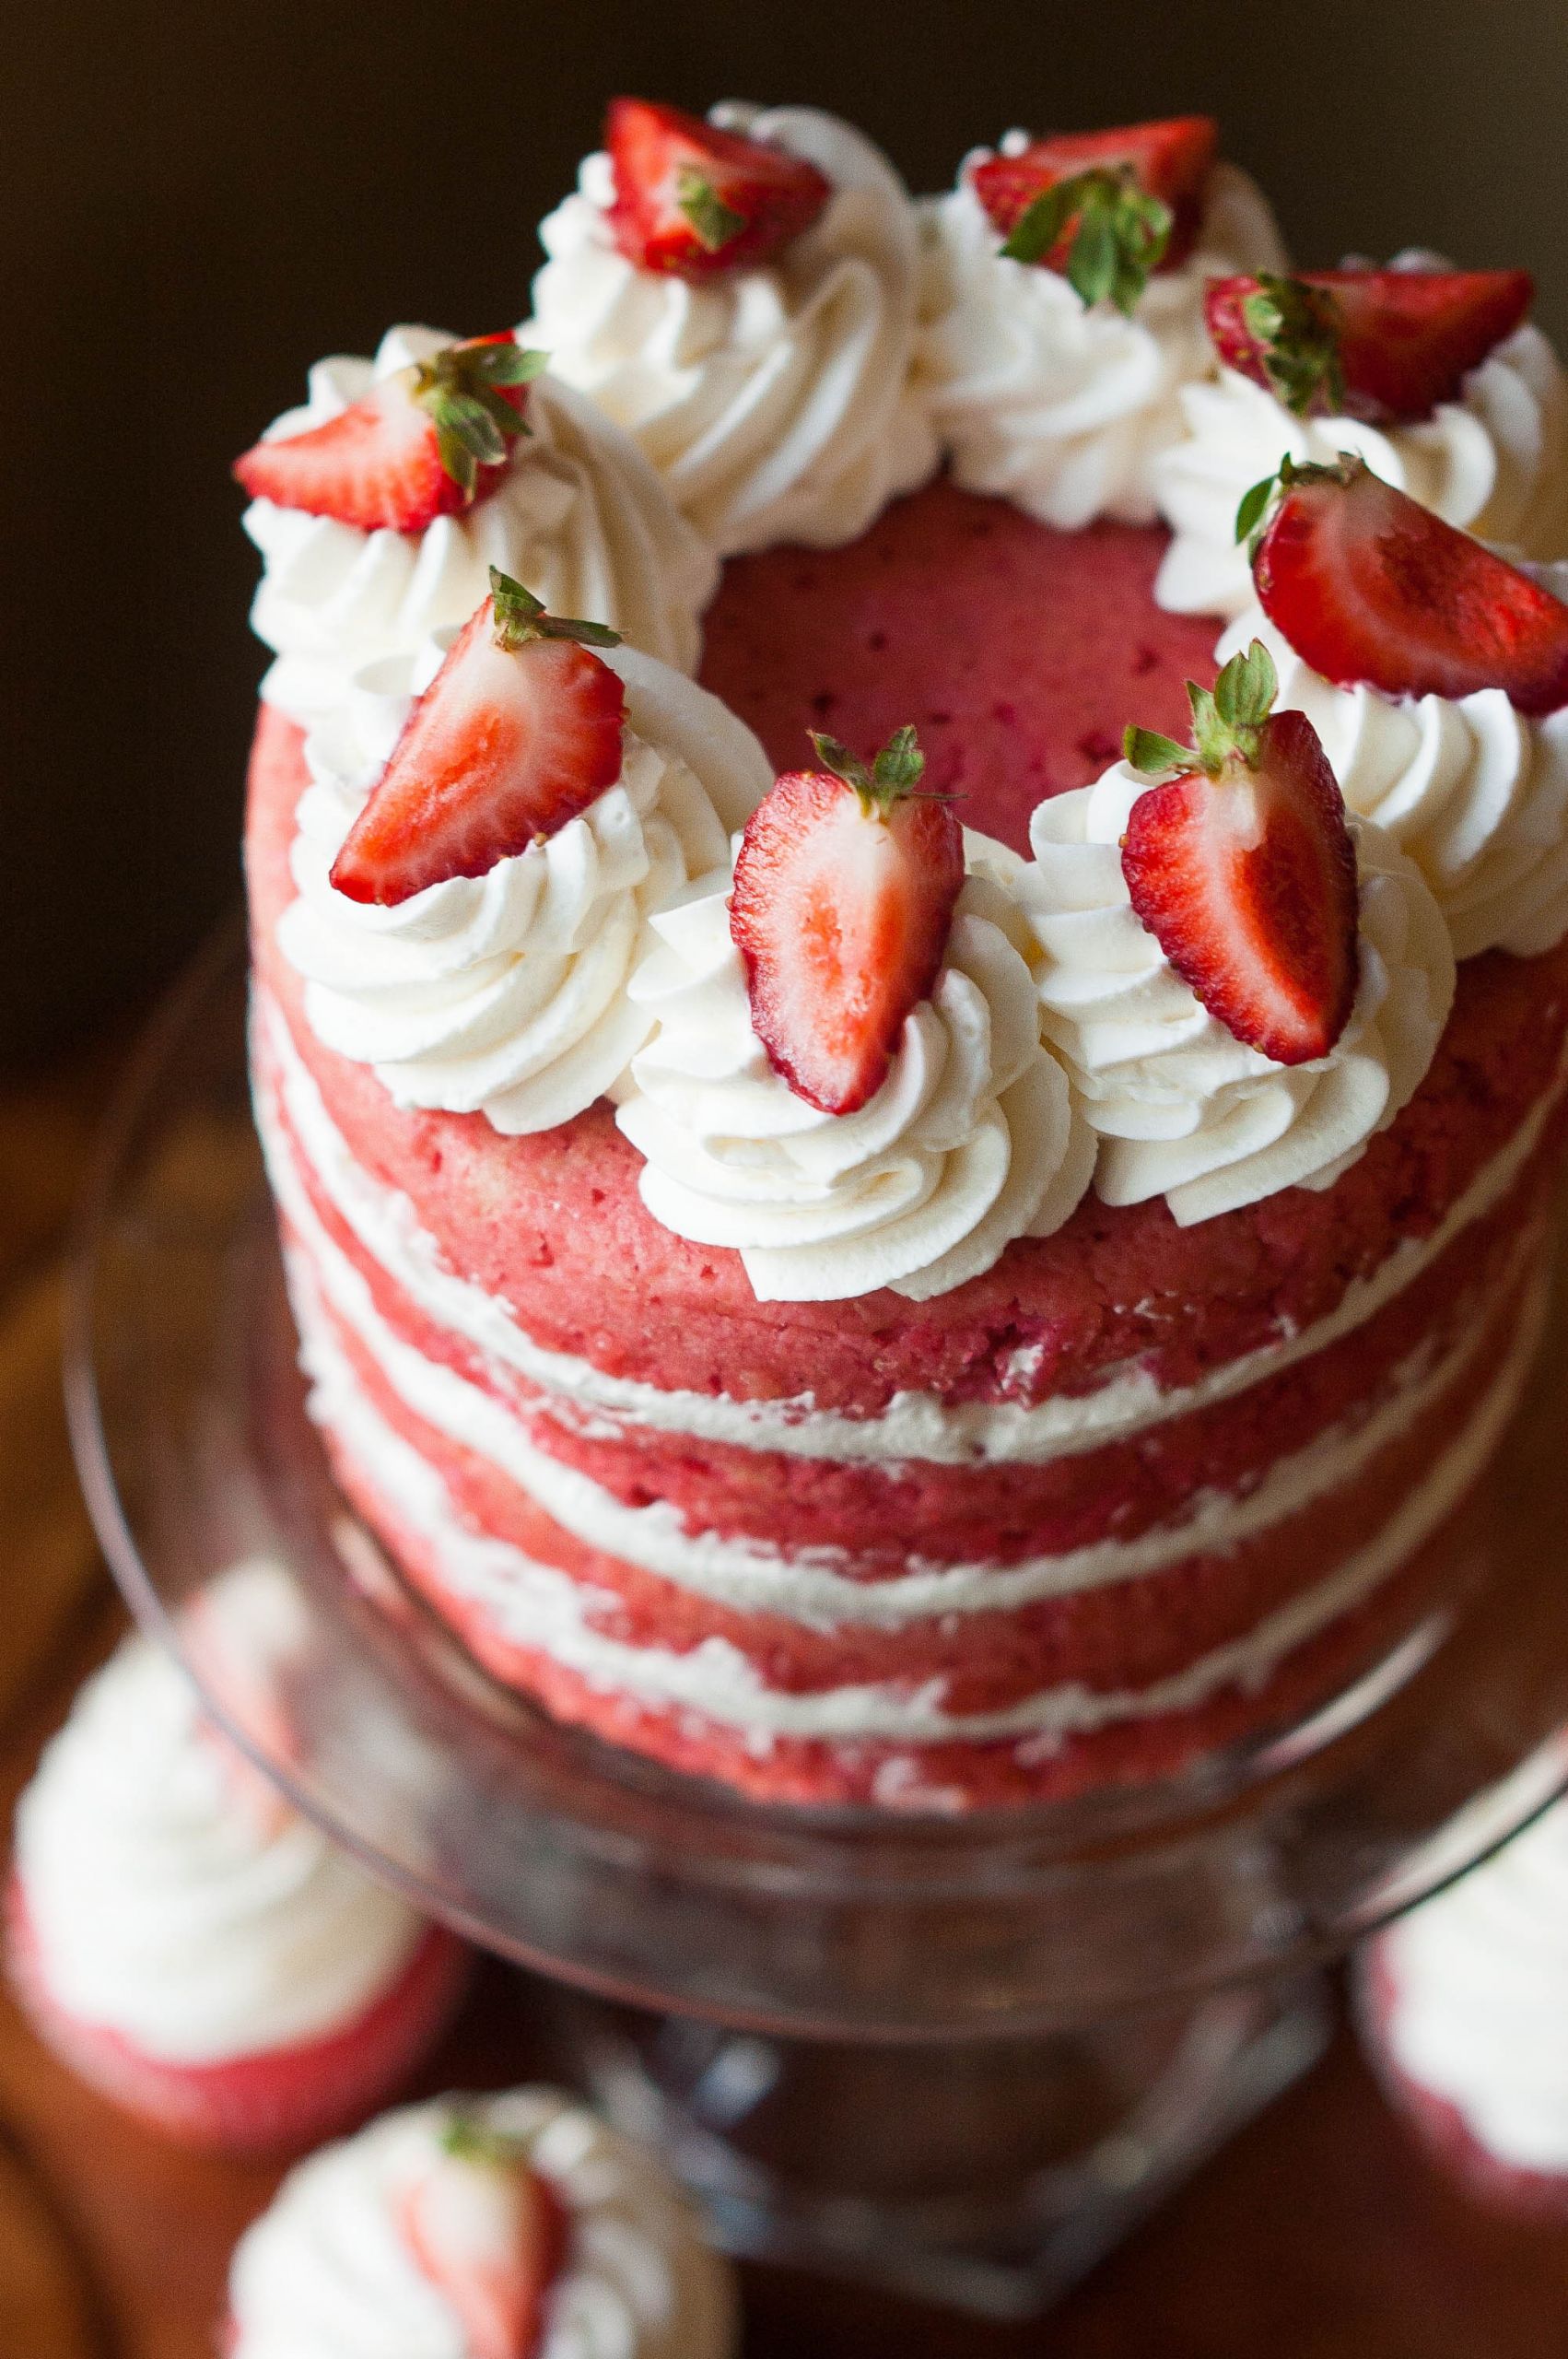 Birthday Cake Recipe From Scratch
 Made from Scratch Strawberries & Cream Cake The Kitchen